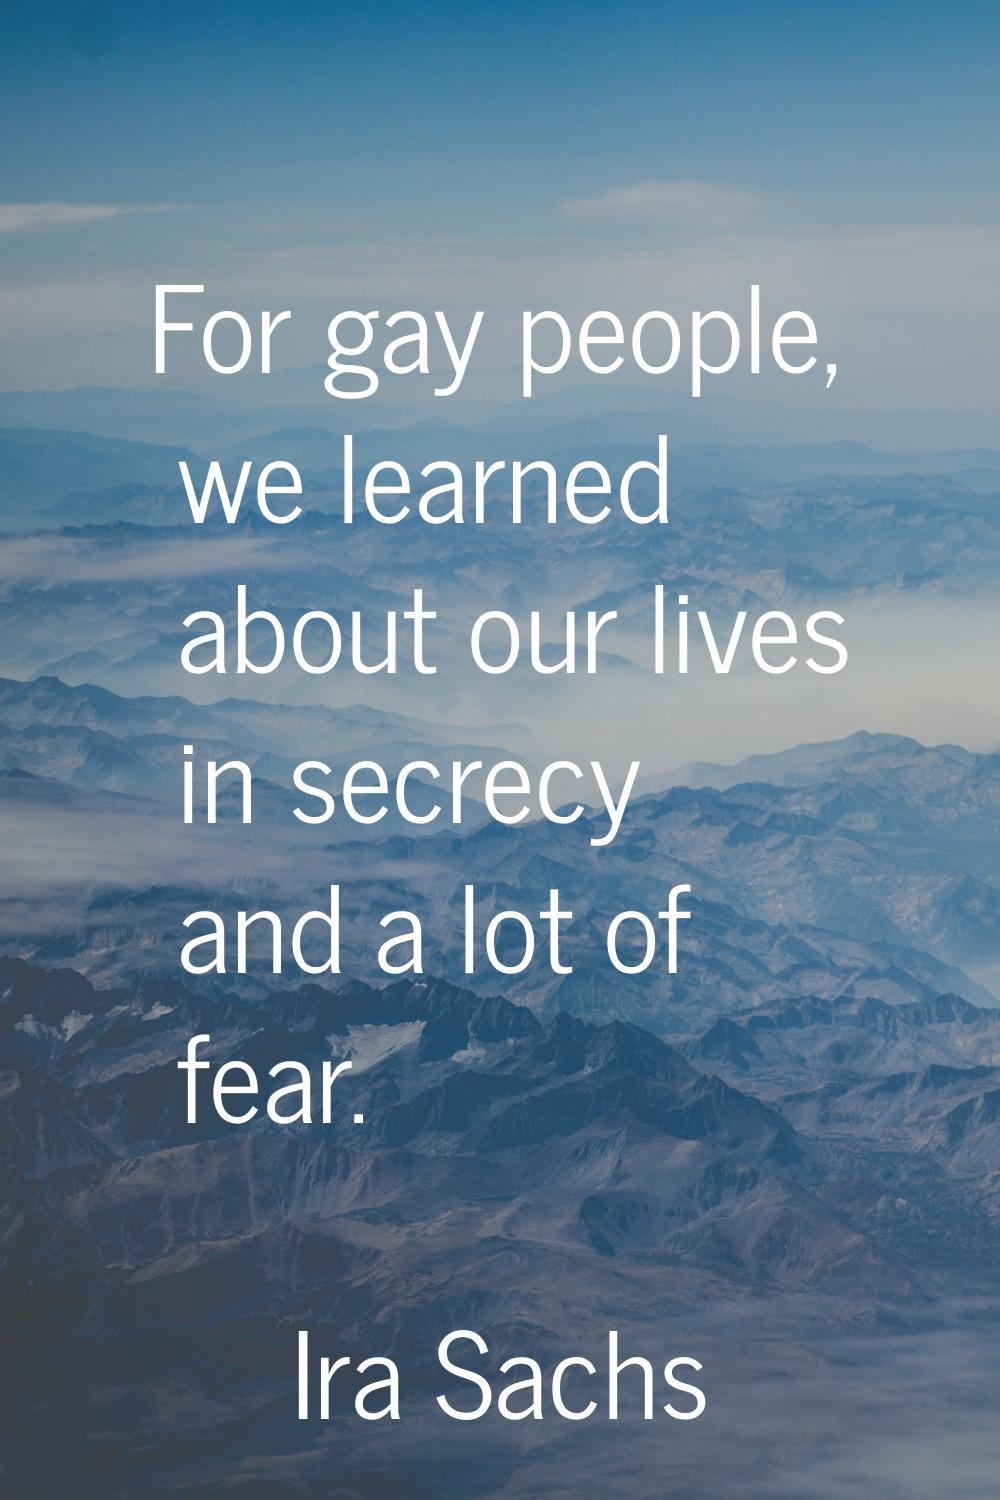 For gay people, we learned about our lives in secrecy and a lot of fear.